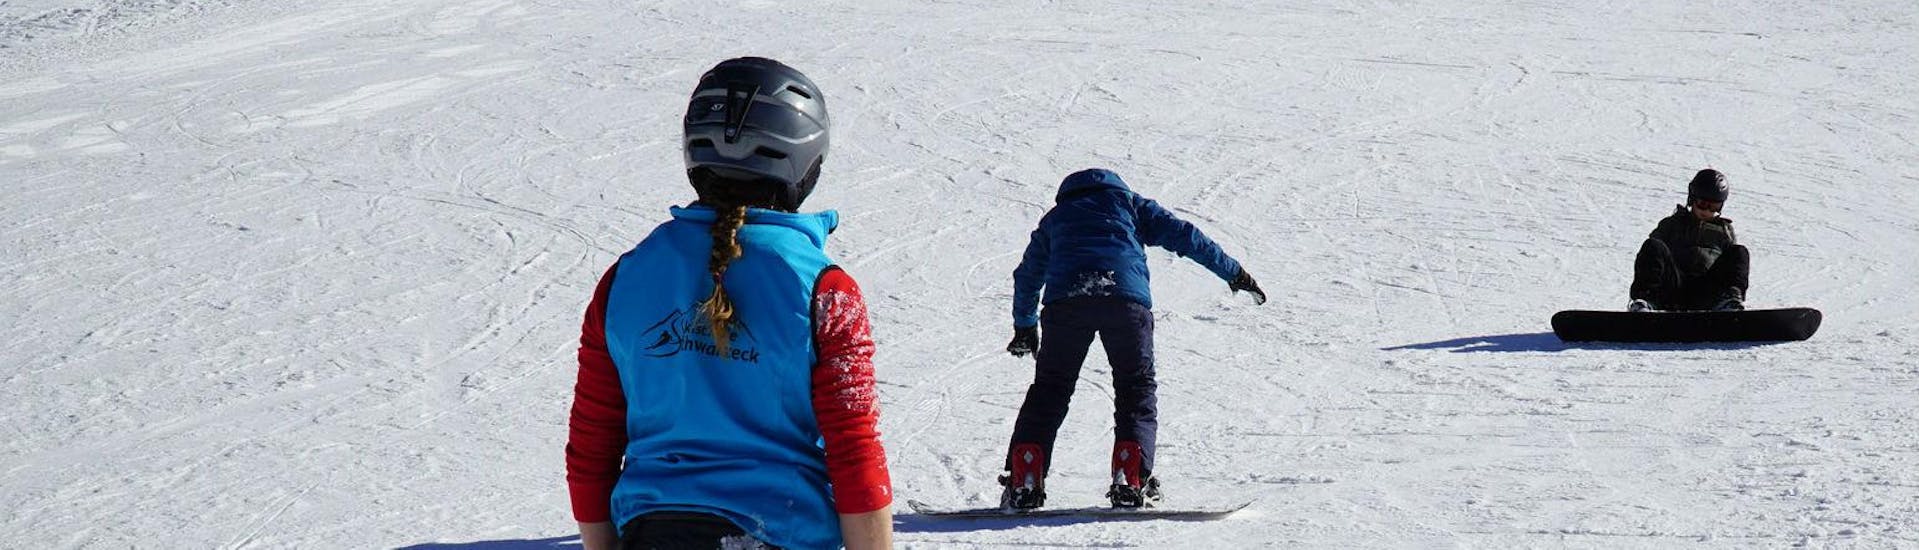 Snowboard Instructor Private - All Levels & Ages.